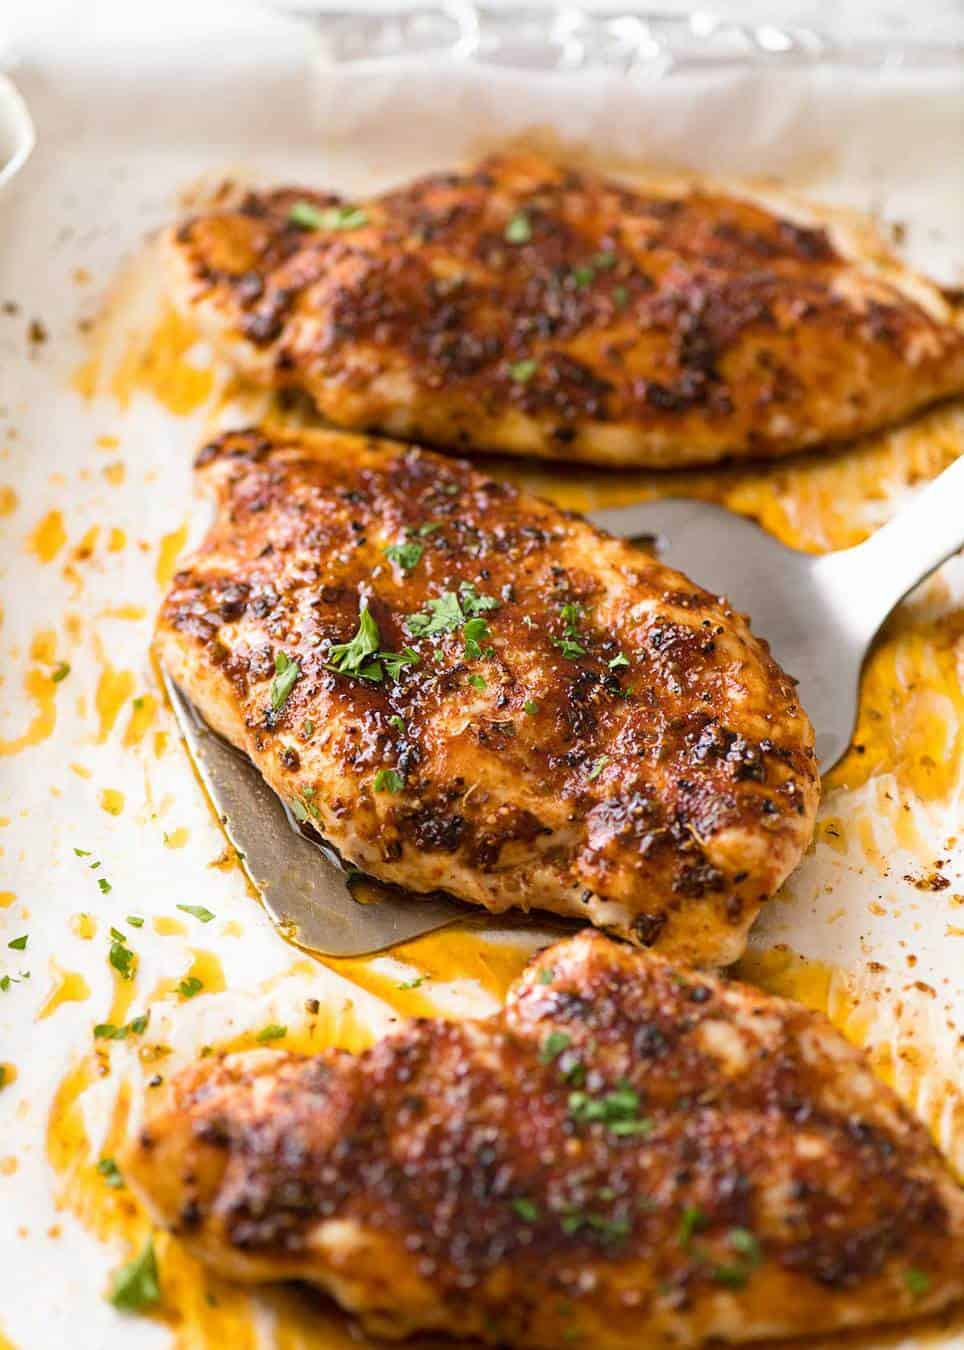 Recipes For Baked Chicken
 Oven Baked Chicken Breast